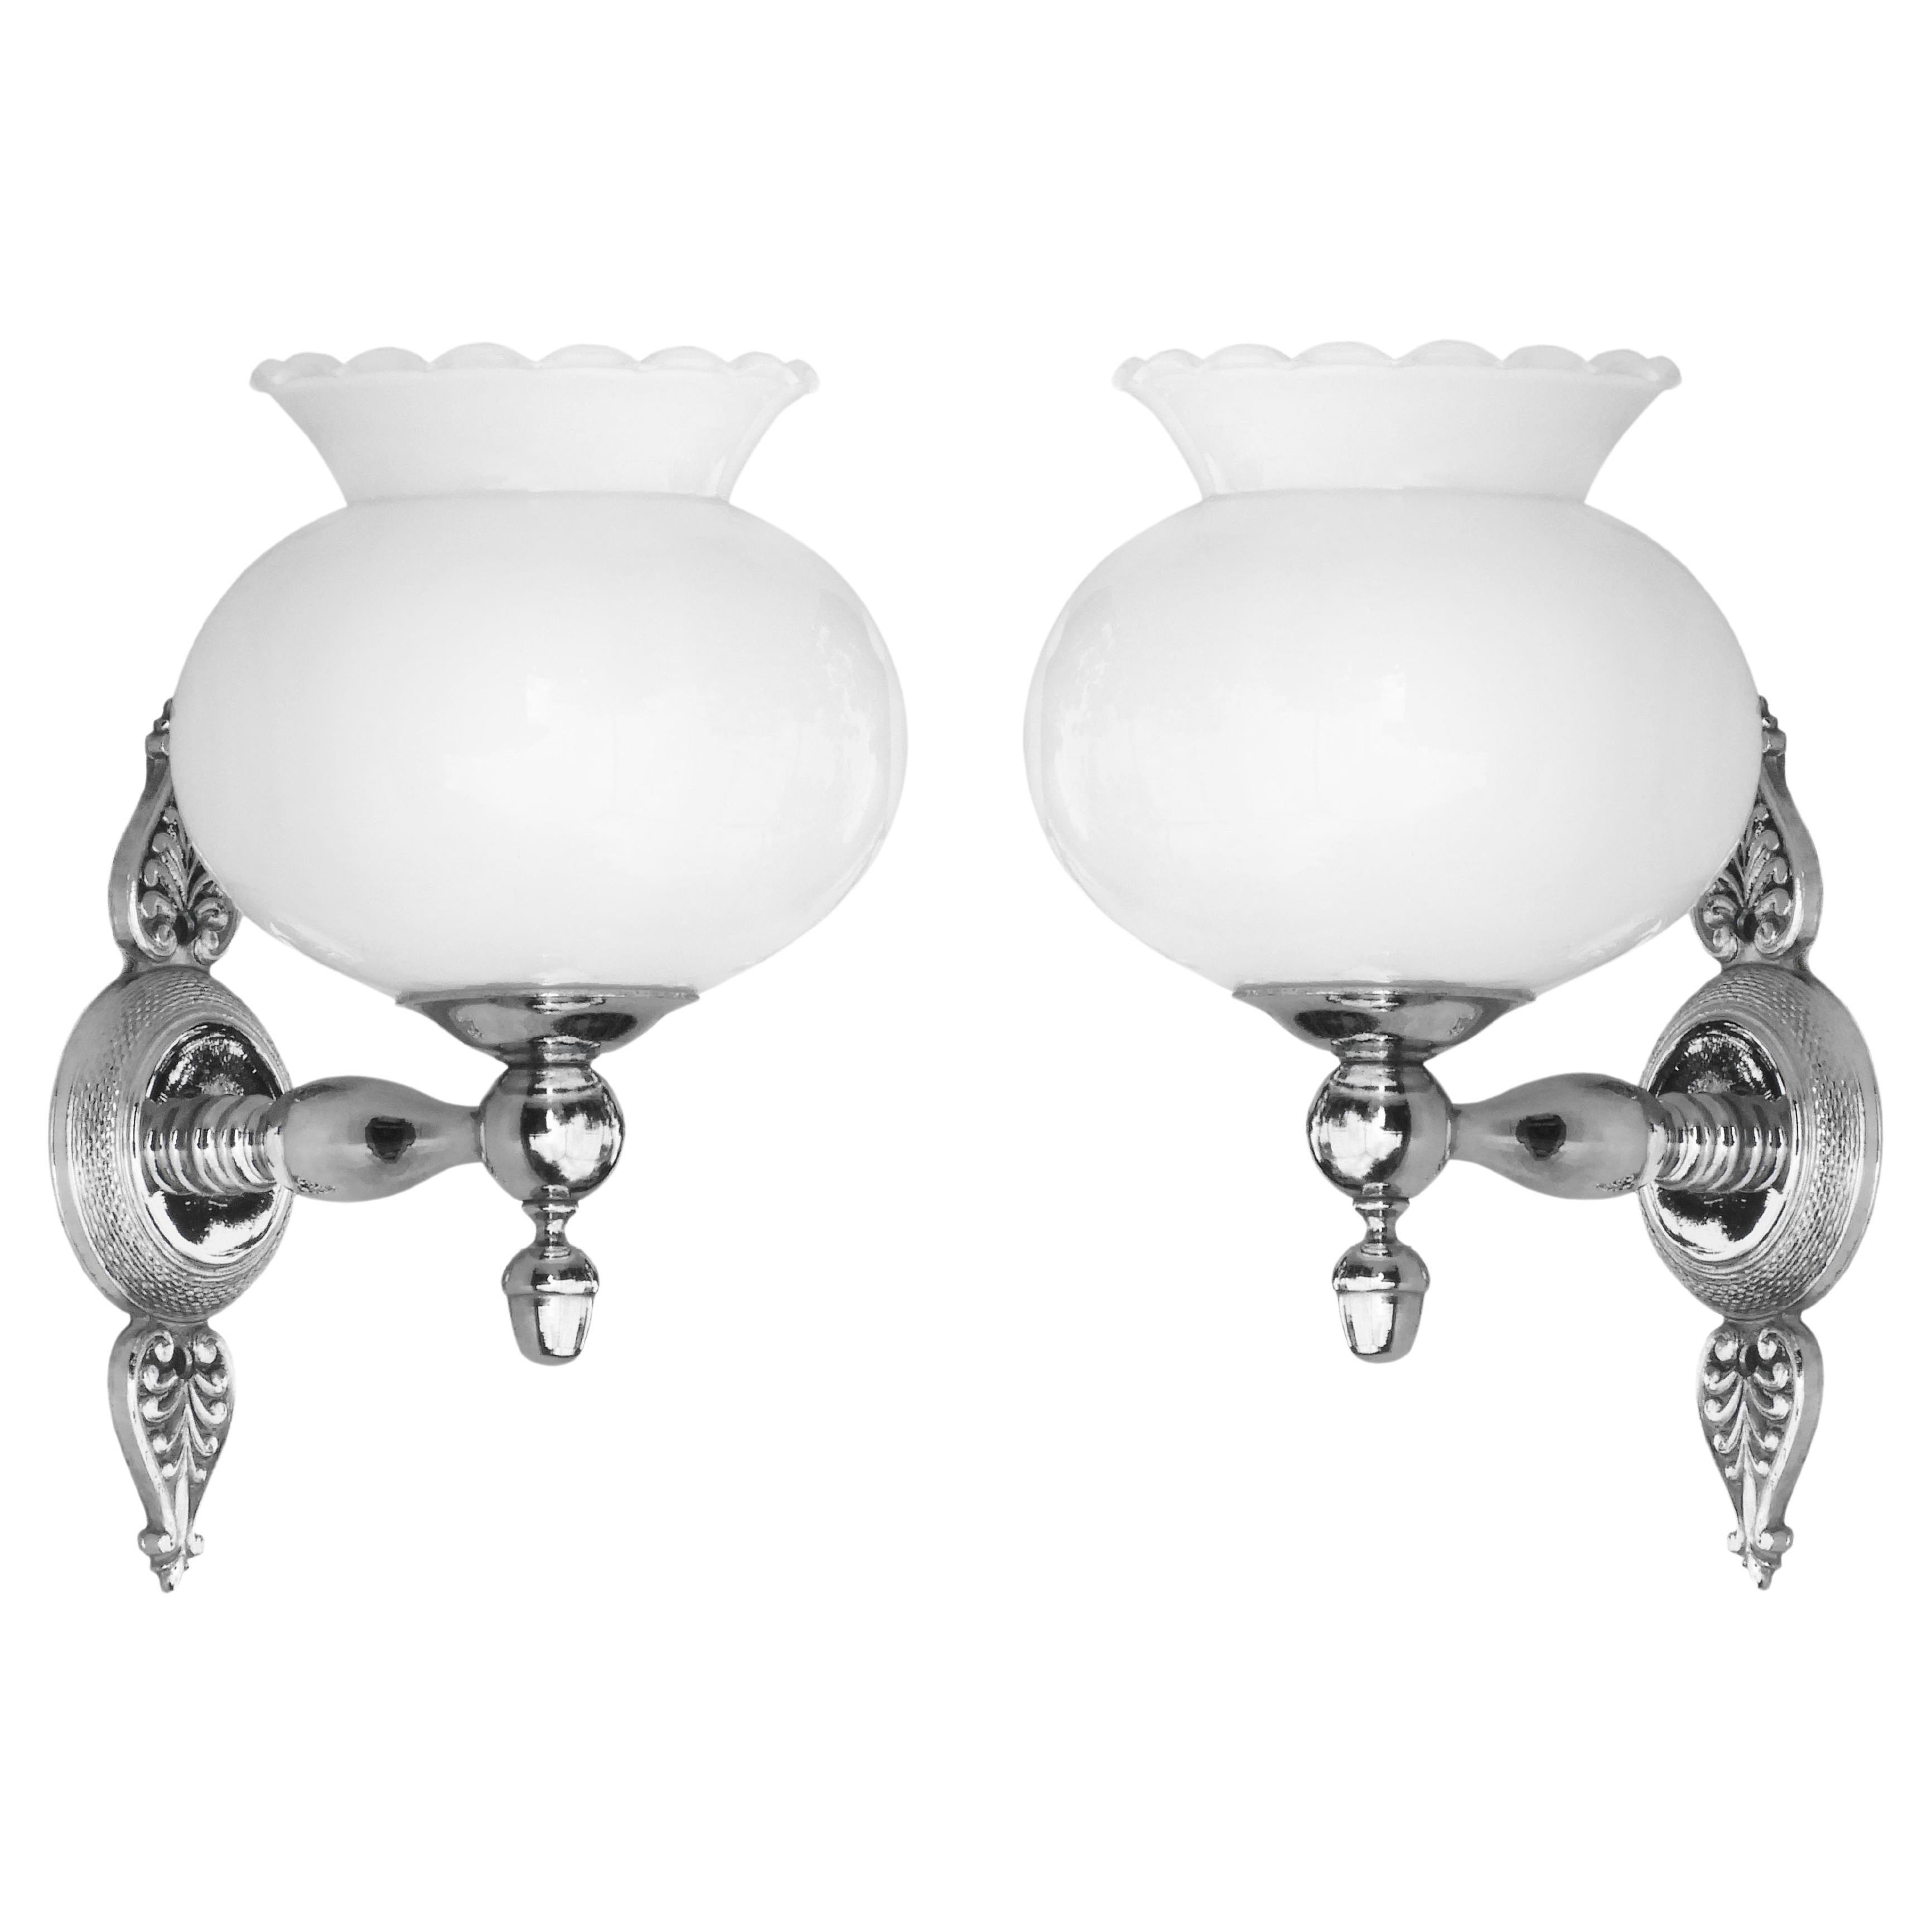 French Empire Revival Wall Light Sconces in Opaline and Chrome, circa 1970